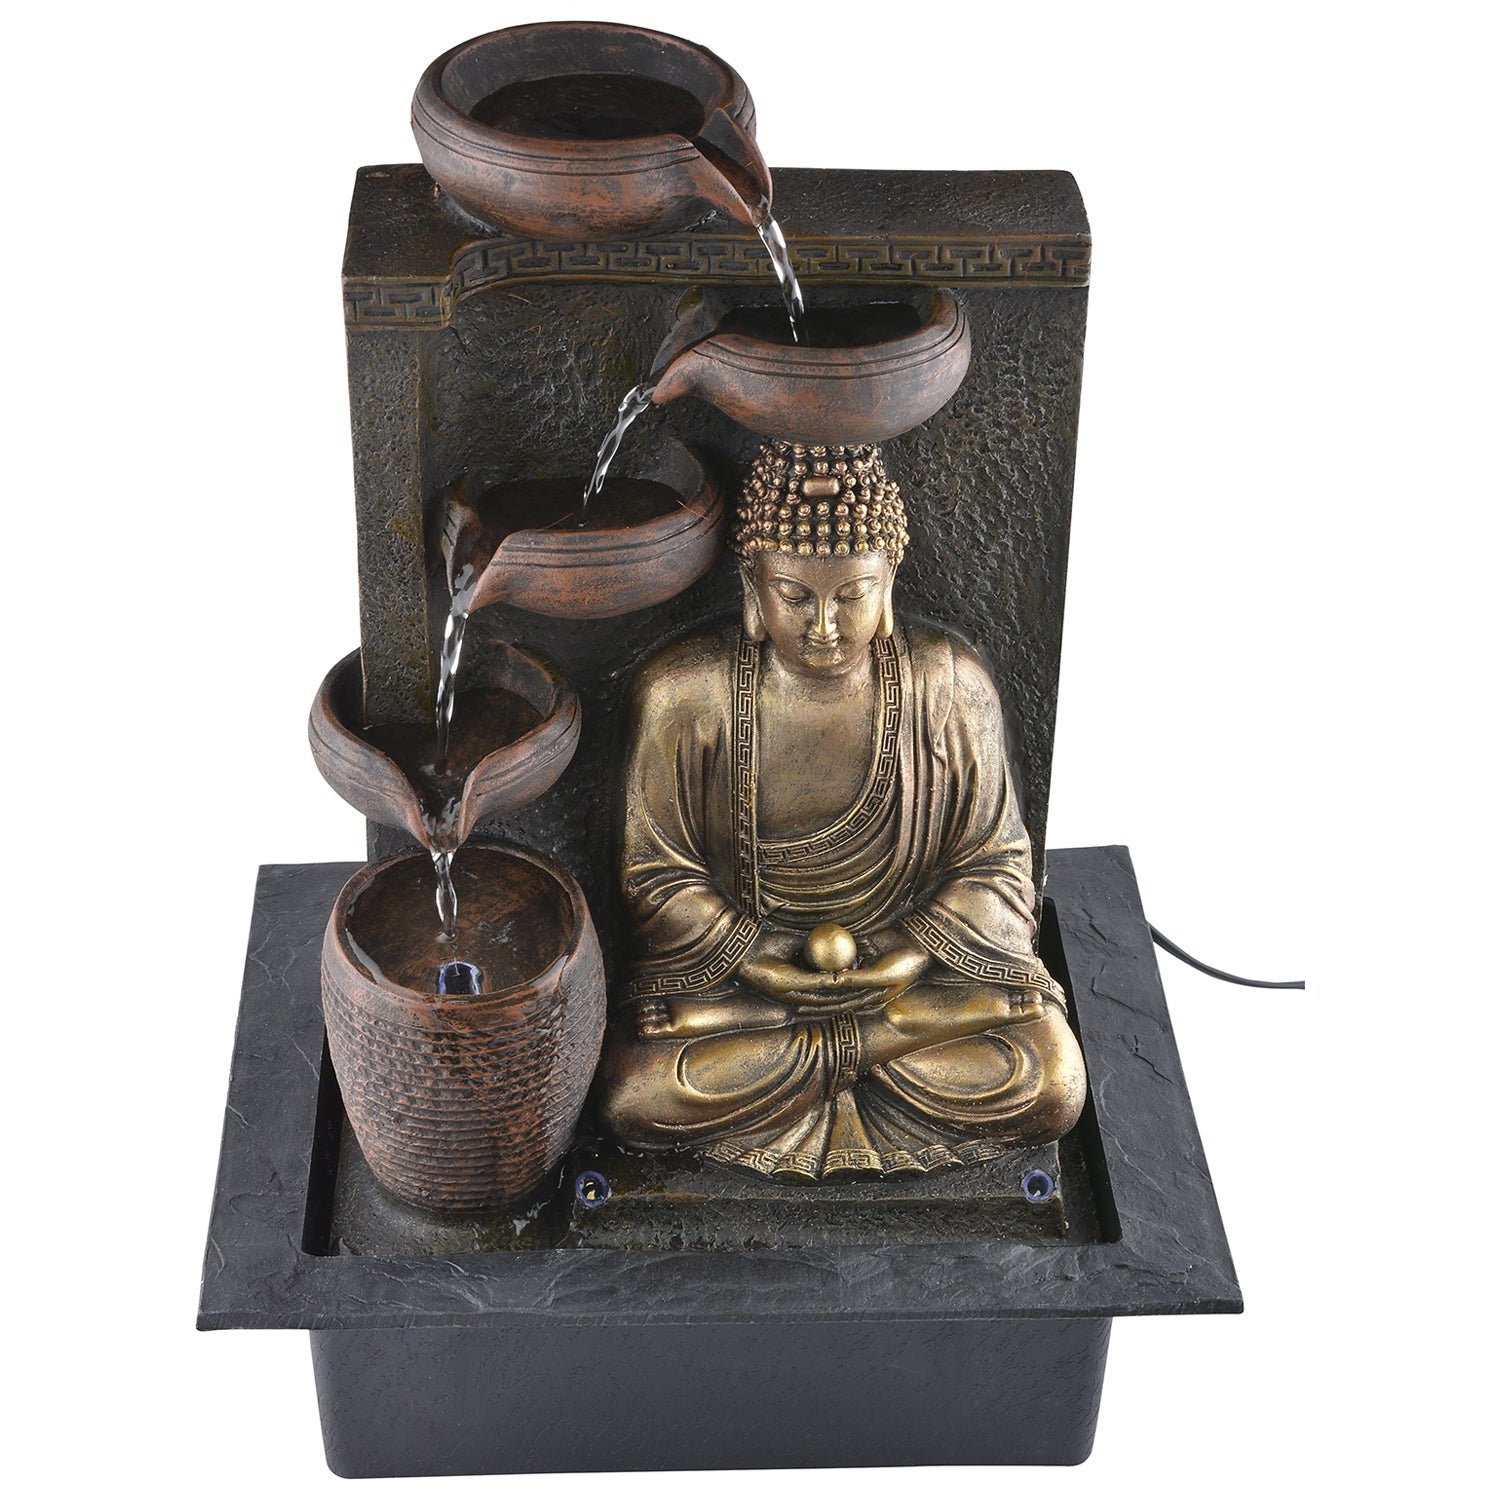 Polystone Brown and Golden Meditating Lord Buddha Water Fountain with LED Light Effects and Water Pump for Home/Office Decor 3